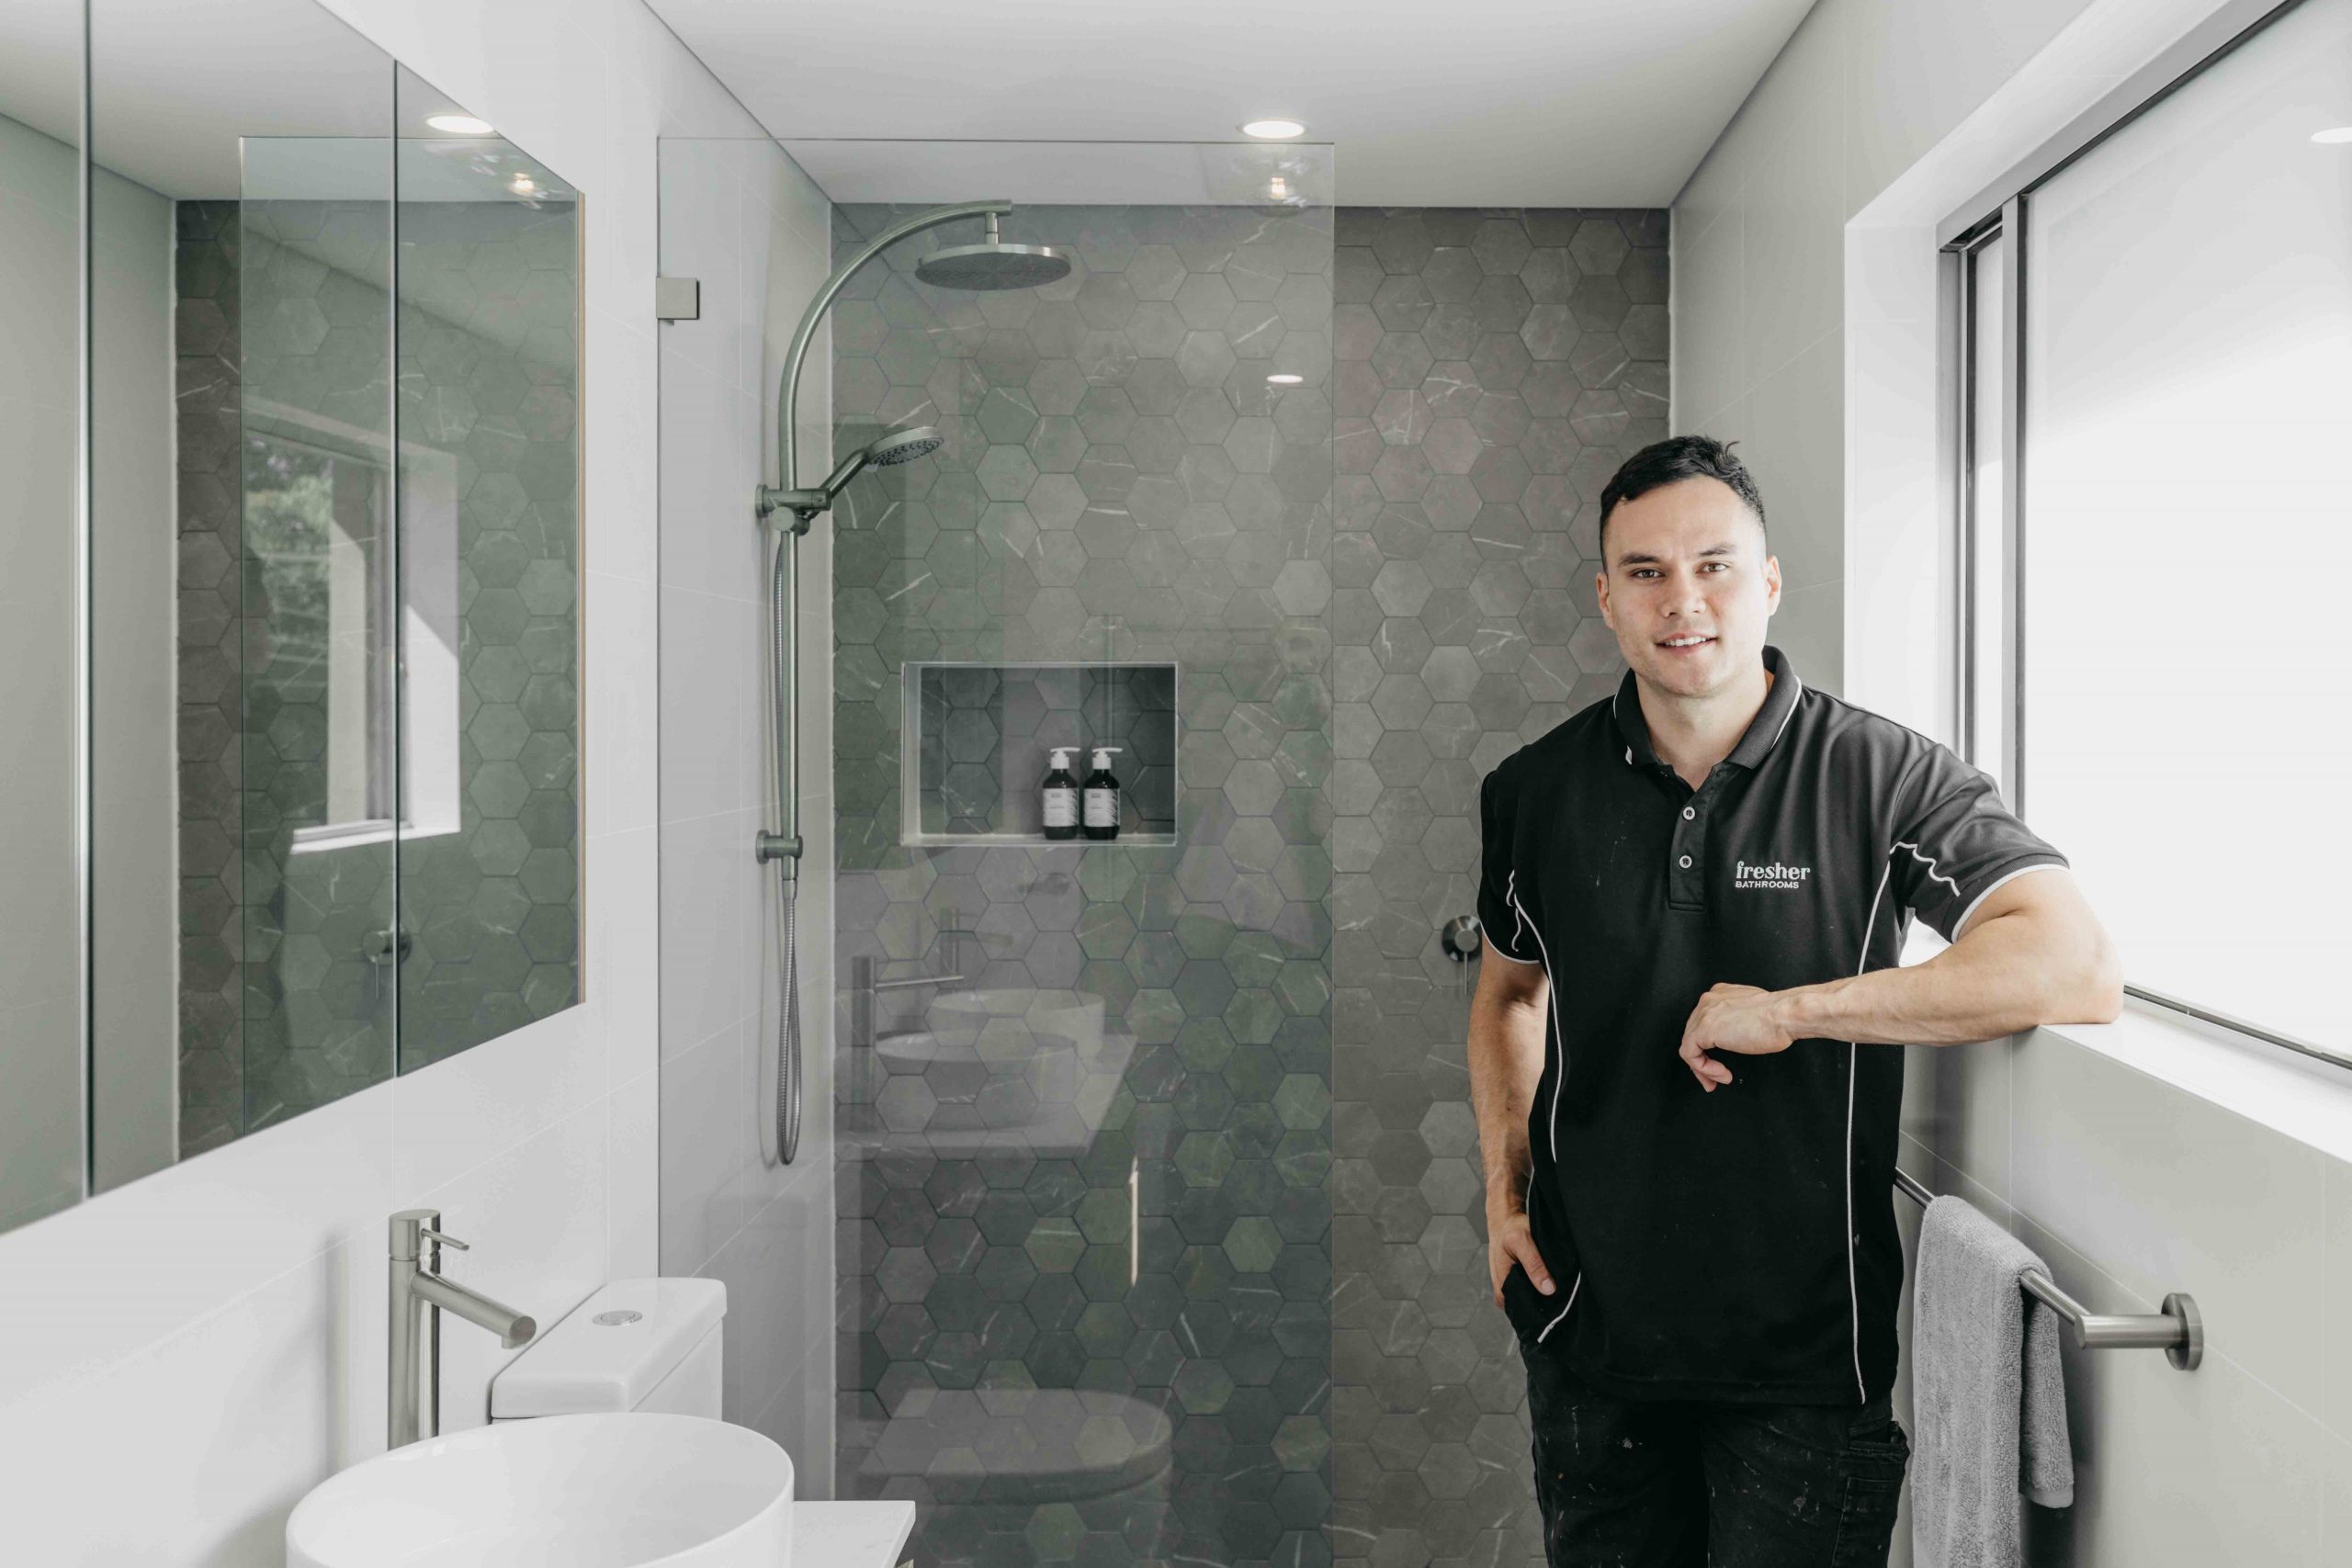 Hire a Professional for bathroom renovation in Sydney